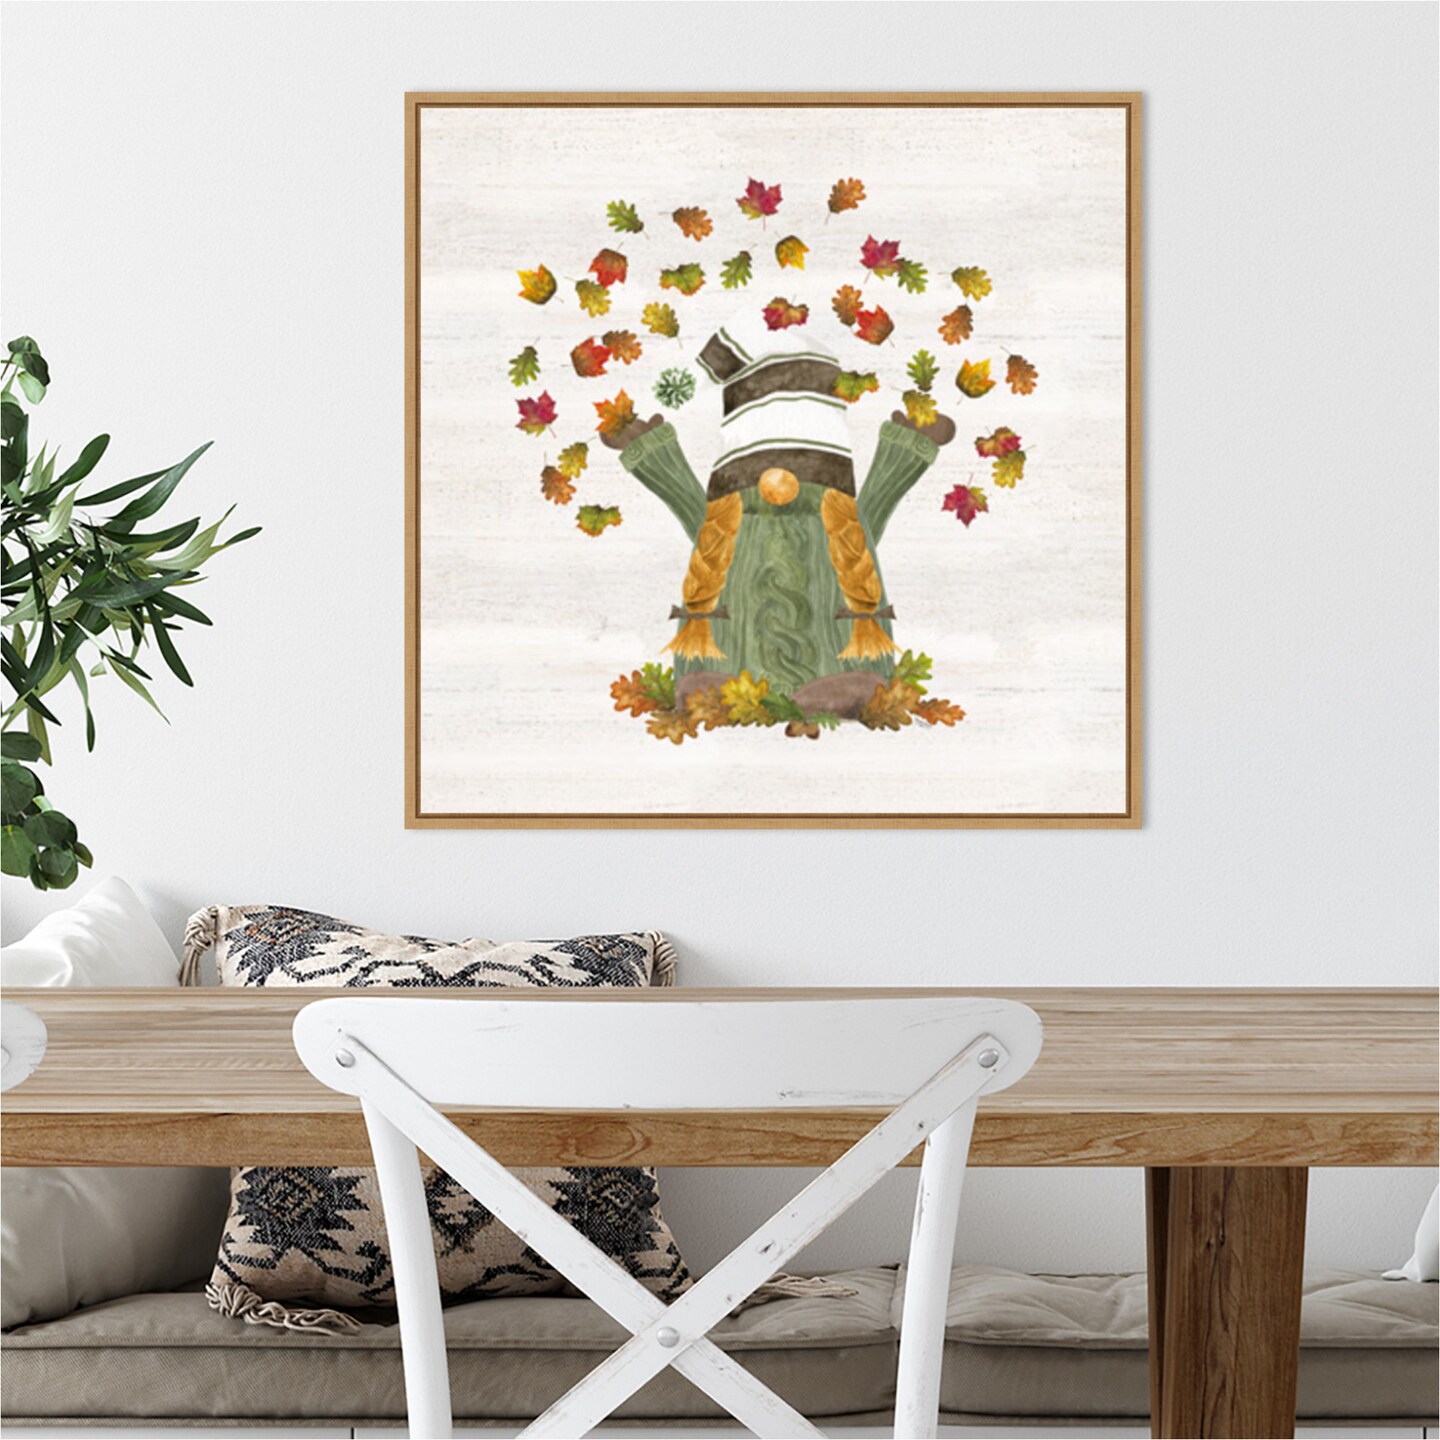 Fall Gnomes VI by Tara Reed 22-in. W x 22-in. H. Canvas Wall Art Print Framed in Natural